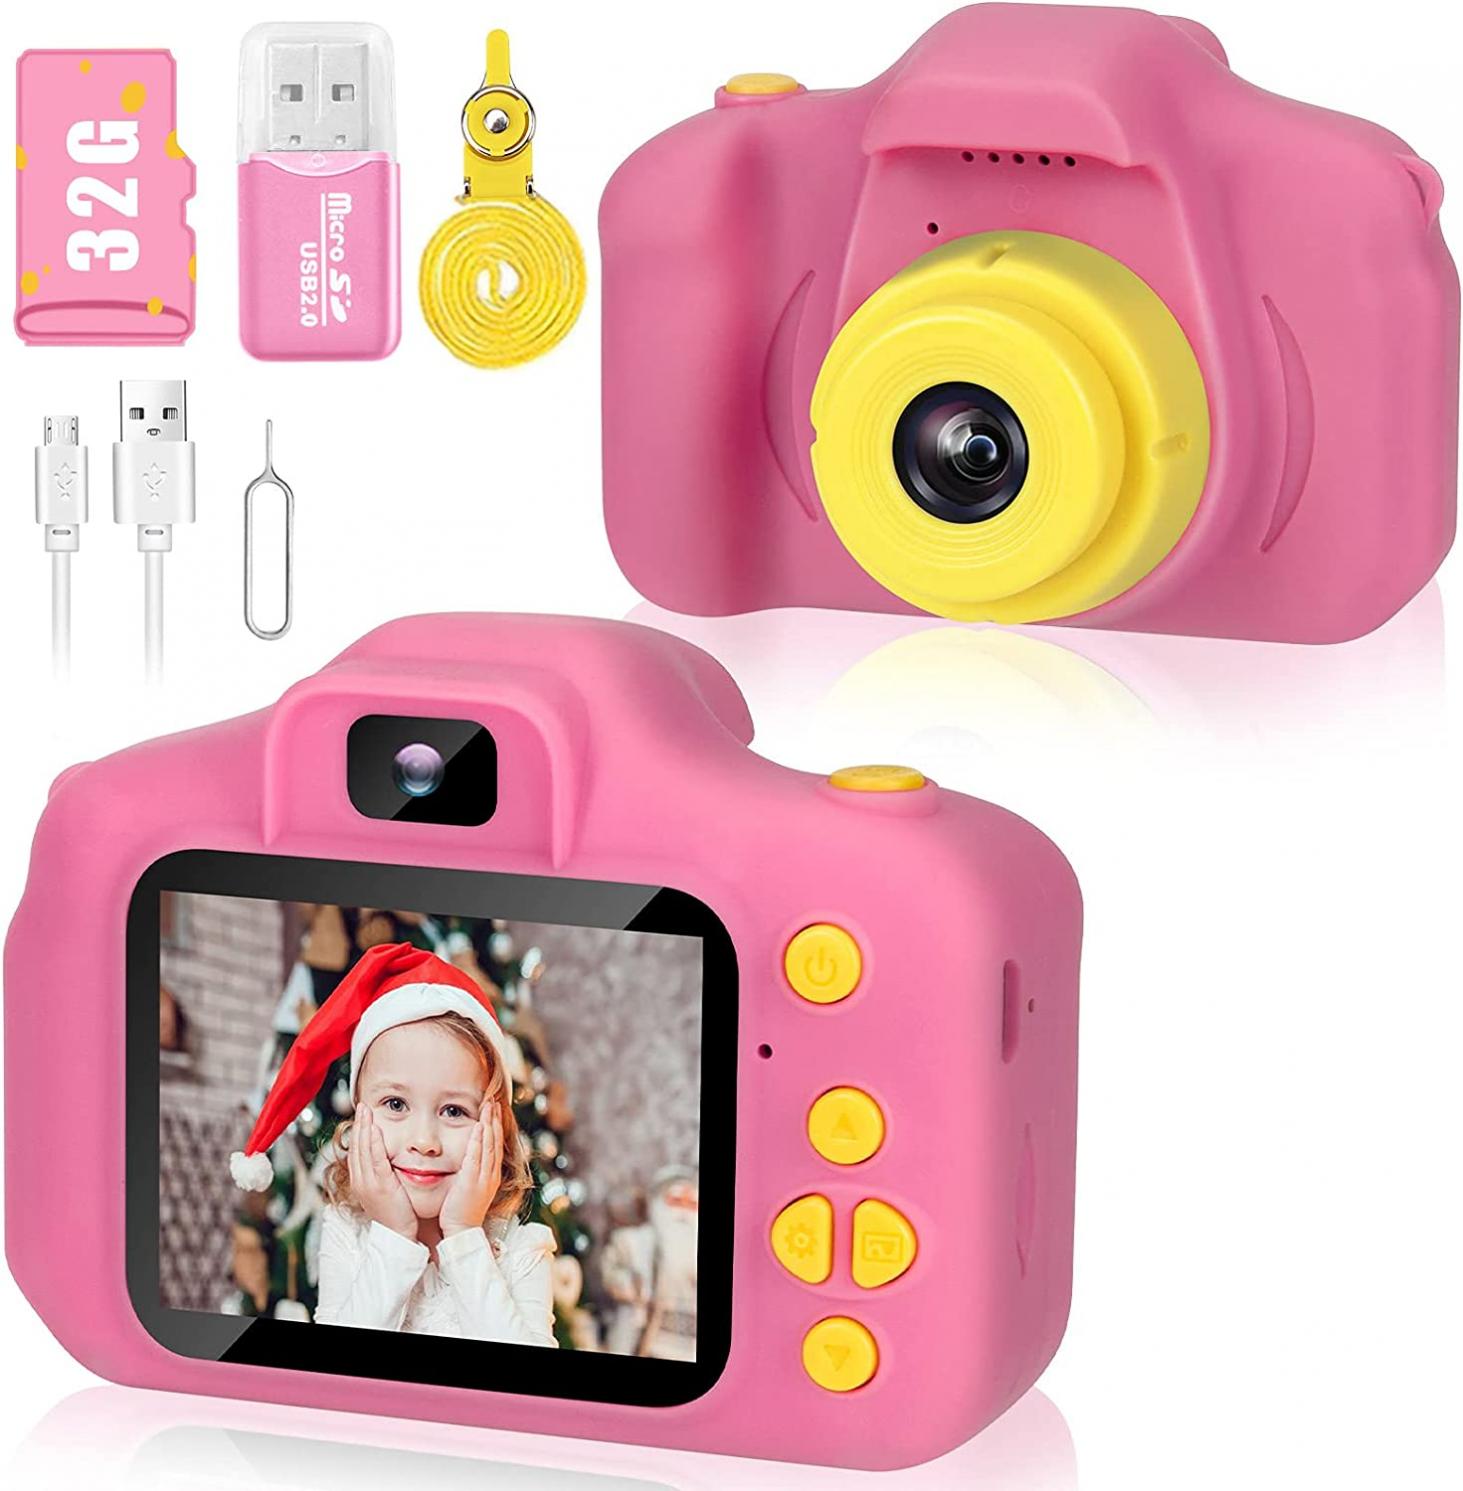 Desuccus Kids Camera,Christmas Birthday Gifts for Girls Age 3-9, HD Digital Video Cameras for Toddler Portable Toys for 3 4 5 6 7 8 Year Old Girl 32GB